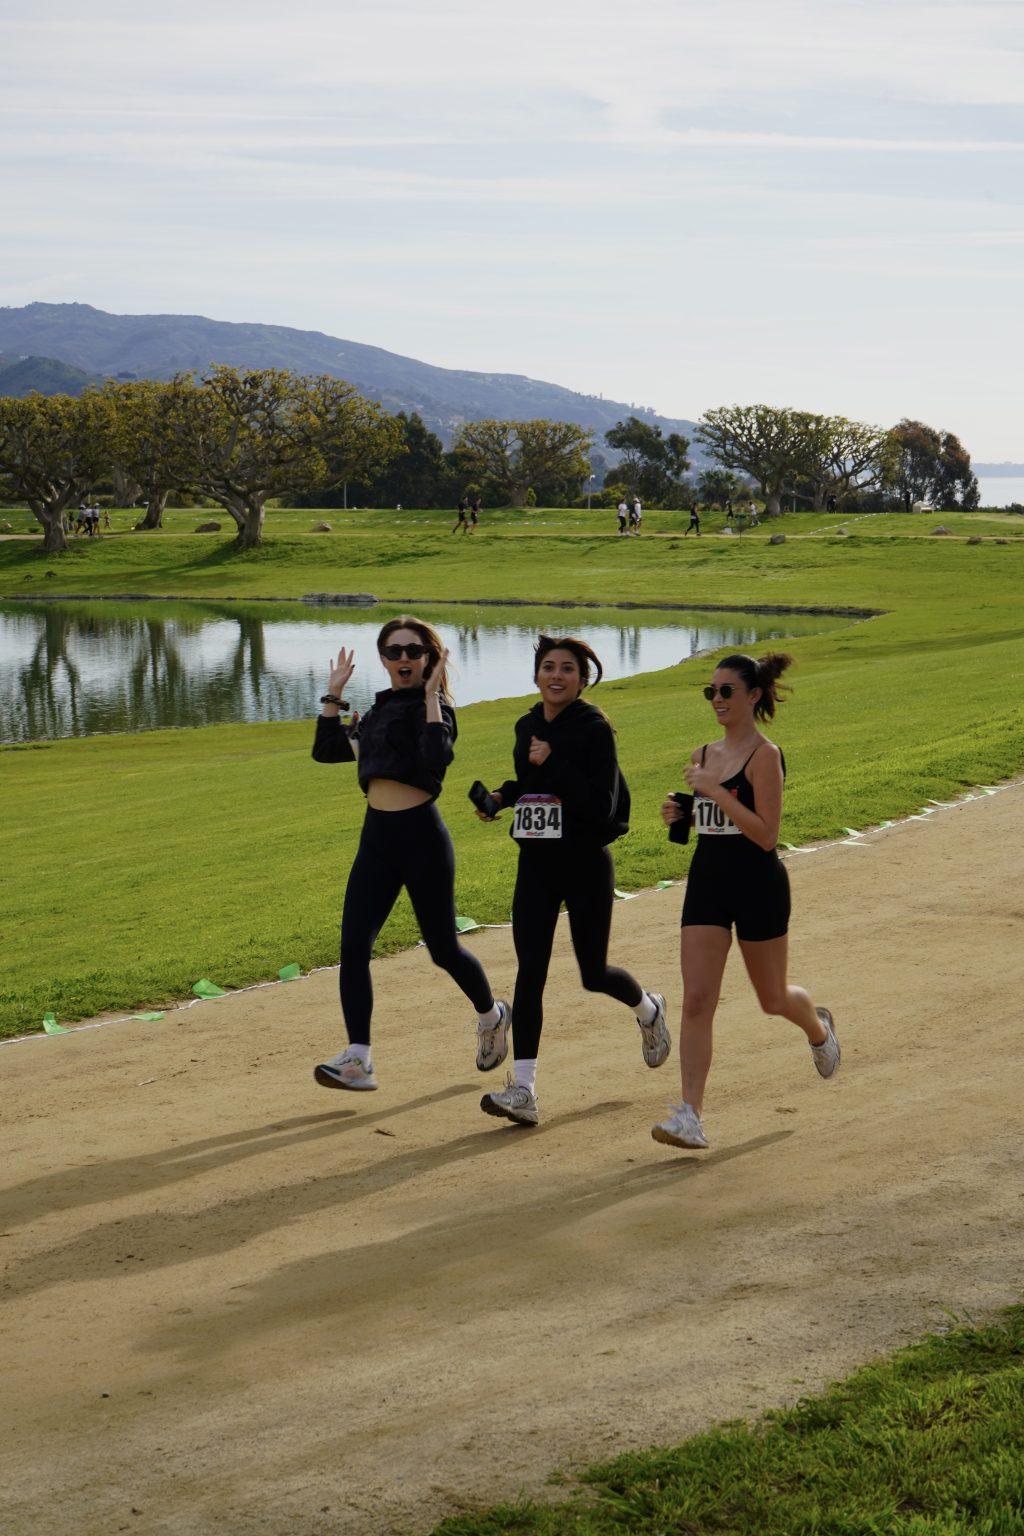 Participants Grace Teague, Fiona Hernandez and Mimi Thomas (left to right) run the grass and dirt course together March 10. The morning was brisk but lively.